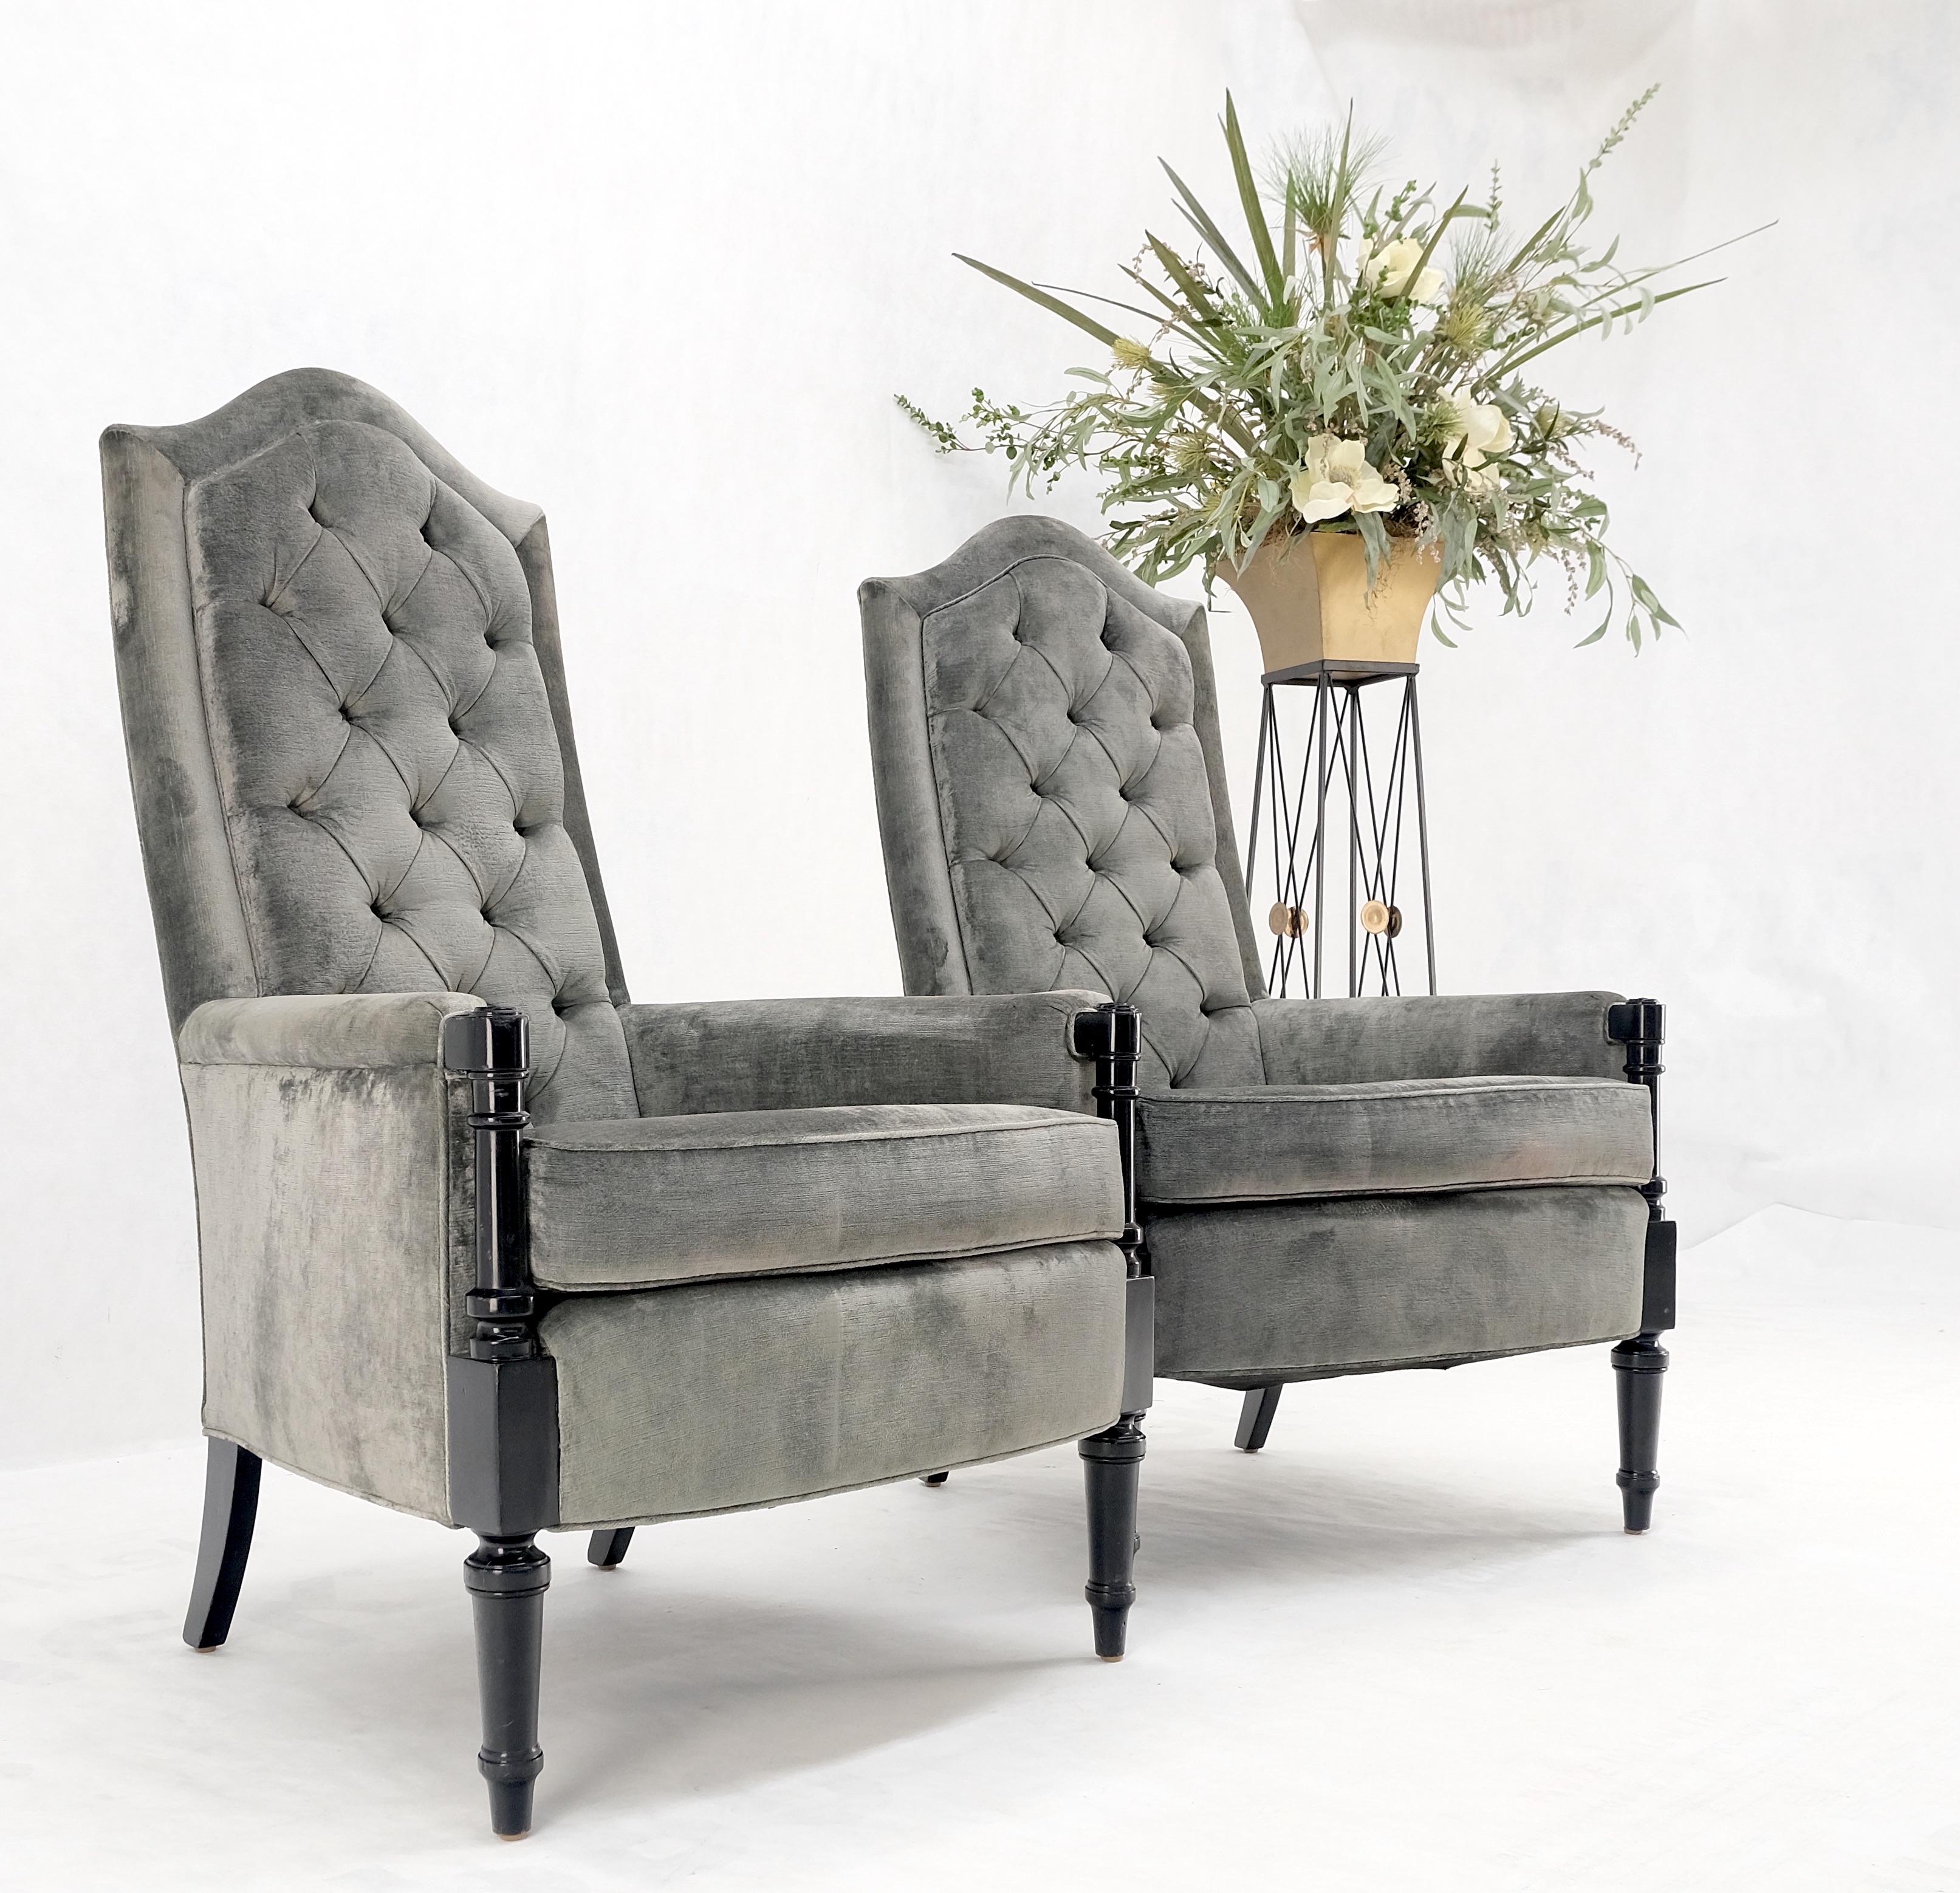 Pair of Tall Tufted Backs Black Lacquer Frames Decorative Arm Chairs Thrones For Sale 8